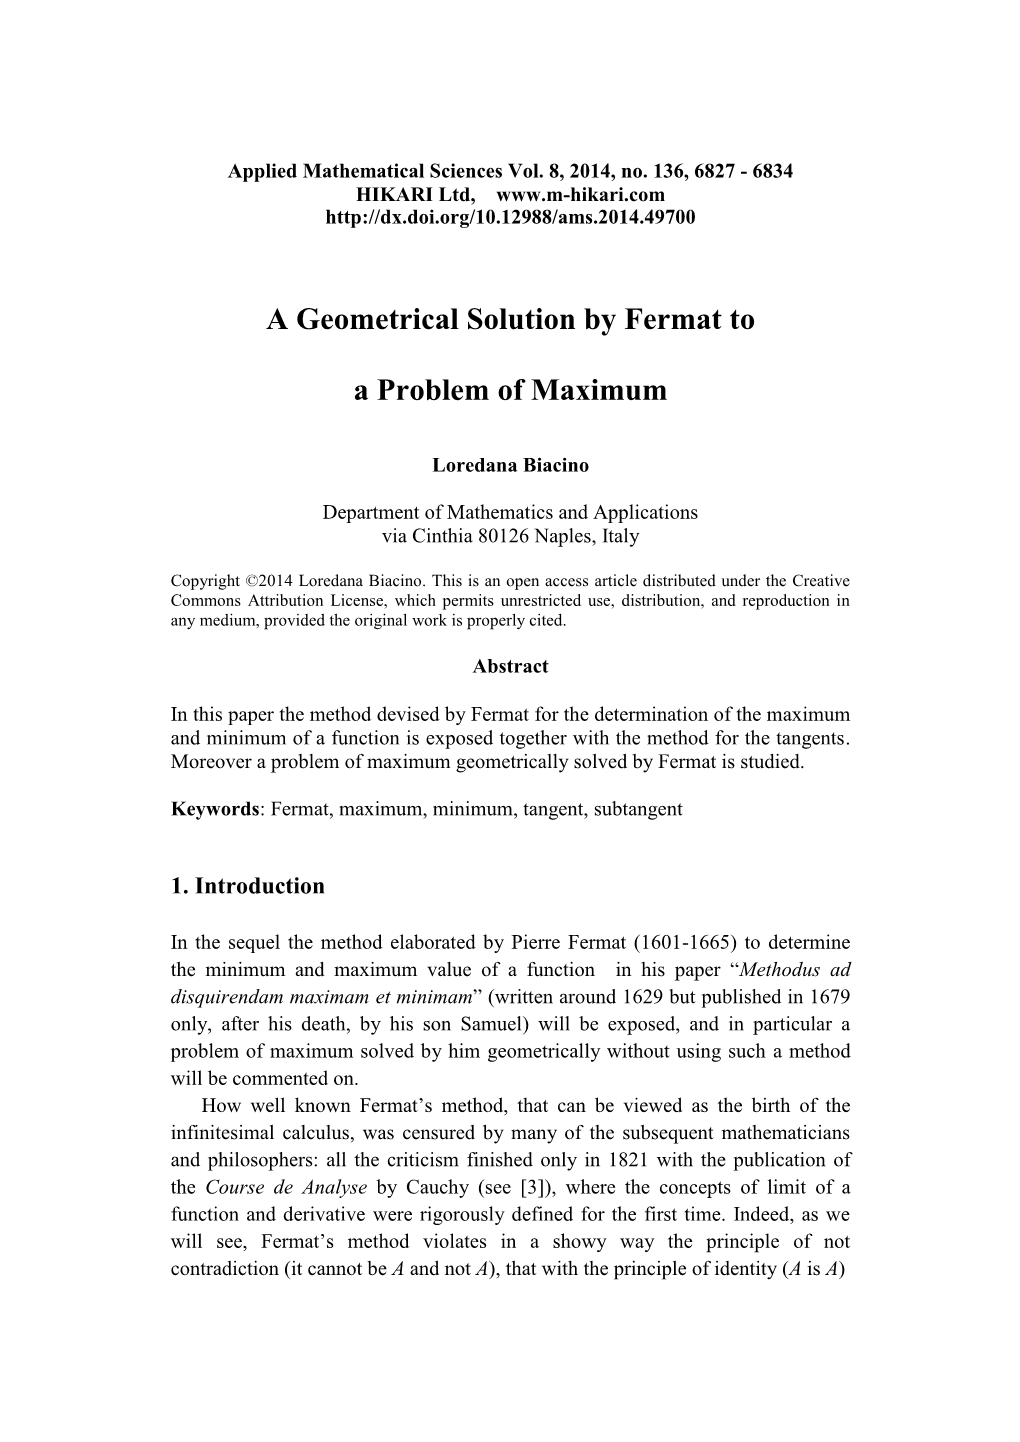 A Geometrical Solution by Fermat to a Problem of Maximum 6829